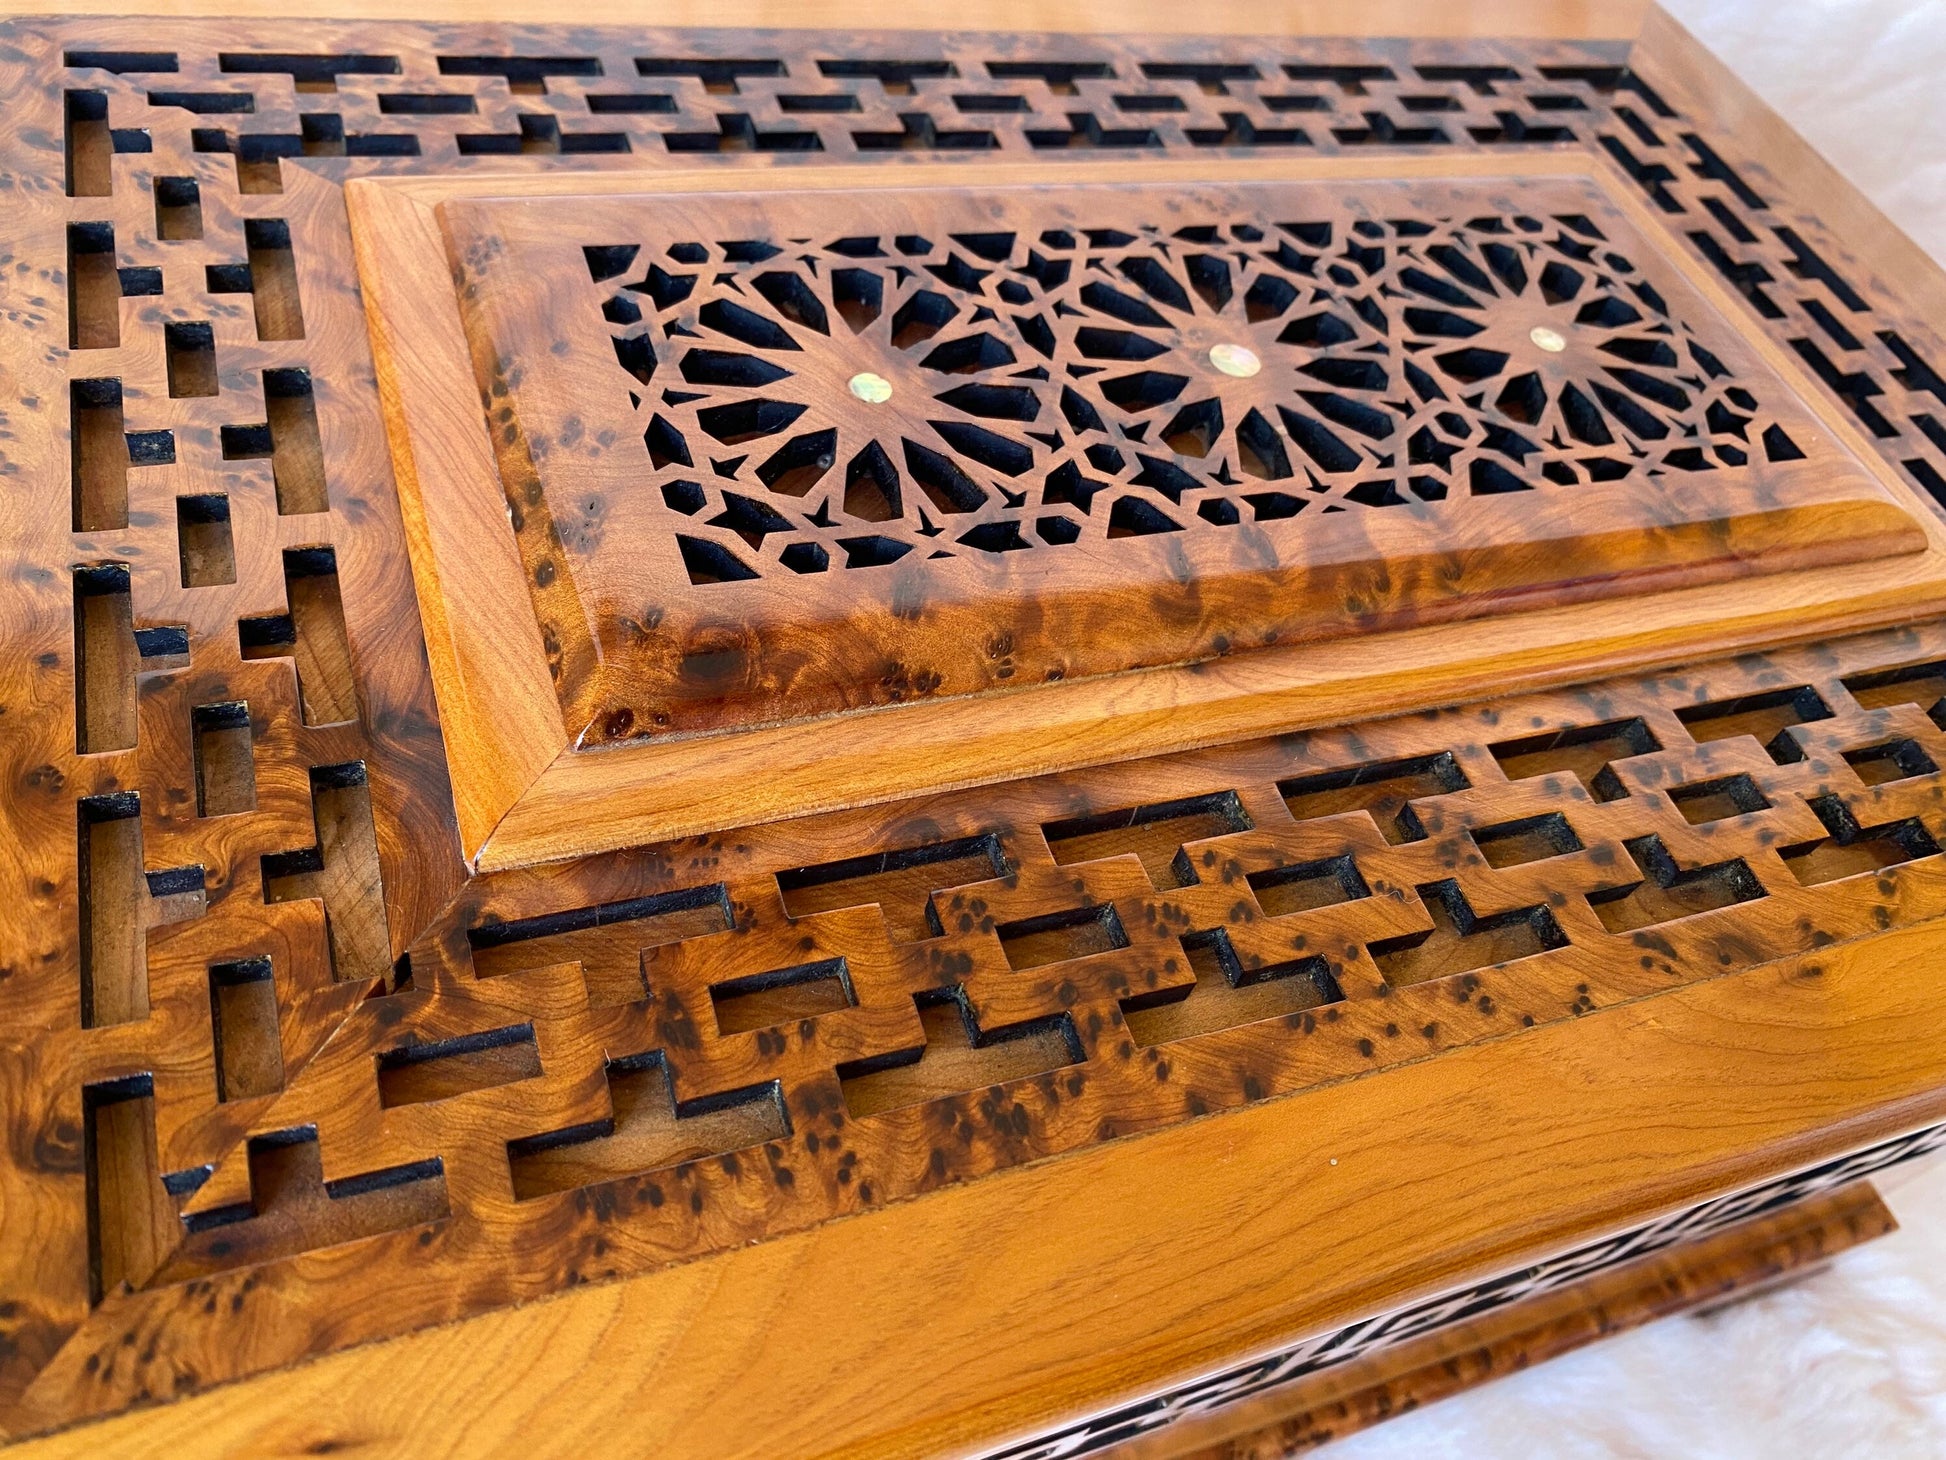 15"x10" Moroccan vintage luxury Royale lockable jewellery wood box,root thuya burl wood,chest inlaid with mother of pearl,Moroccan engraving